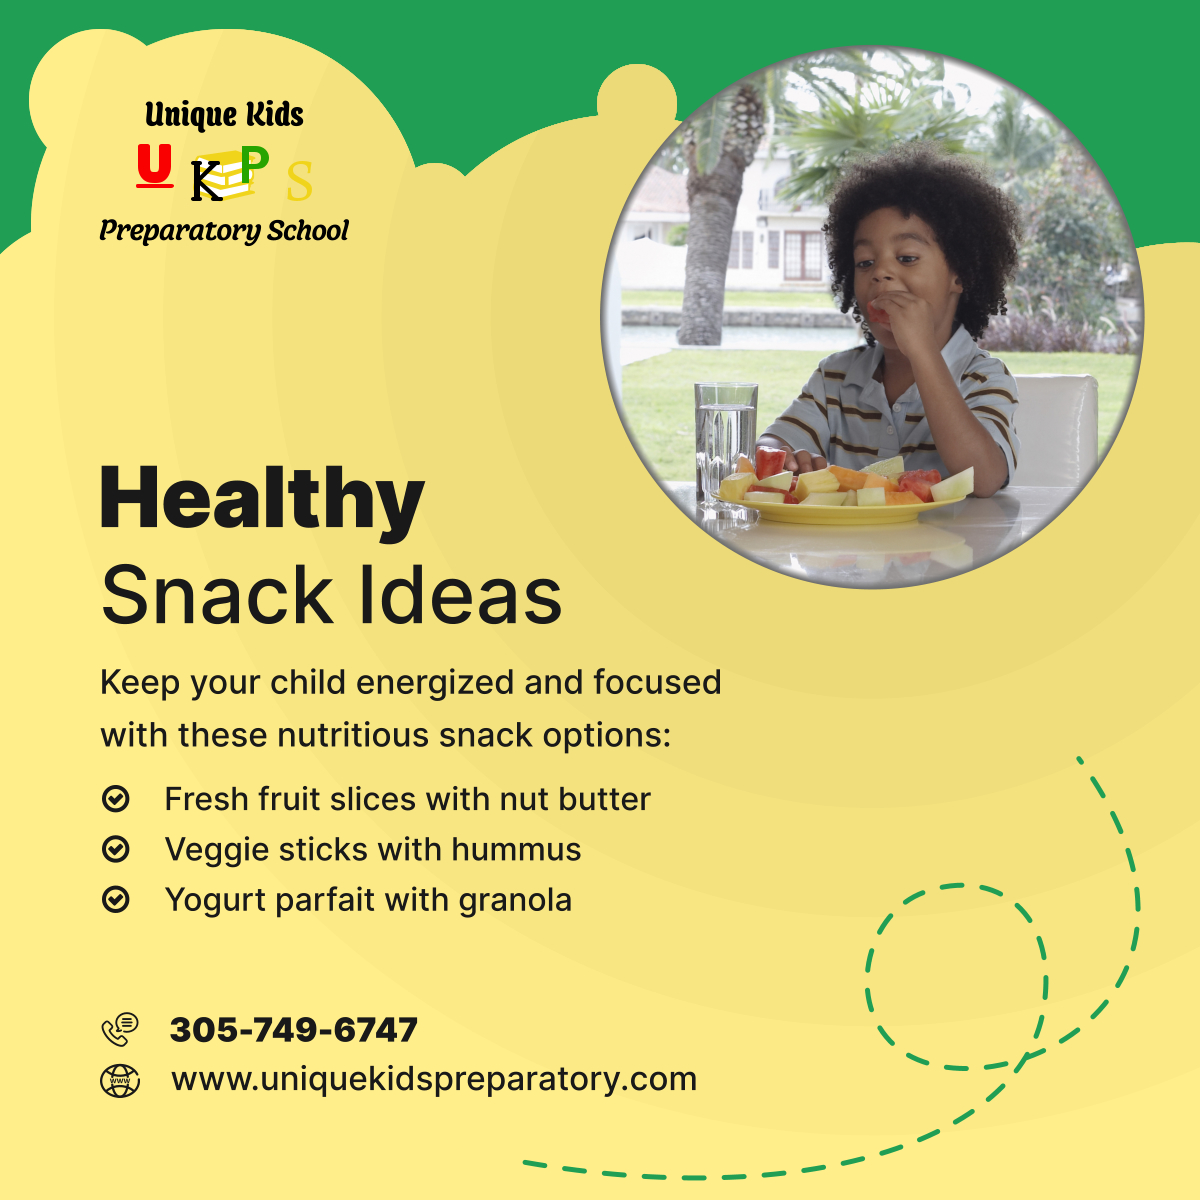 Fuel your child's body and mind with these tasty and nutritious snack ideas, perfect for sustaining energy throughout the day! 

#PreparatorySchool #KidsNutrition #MiamiFL